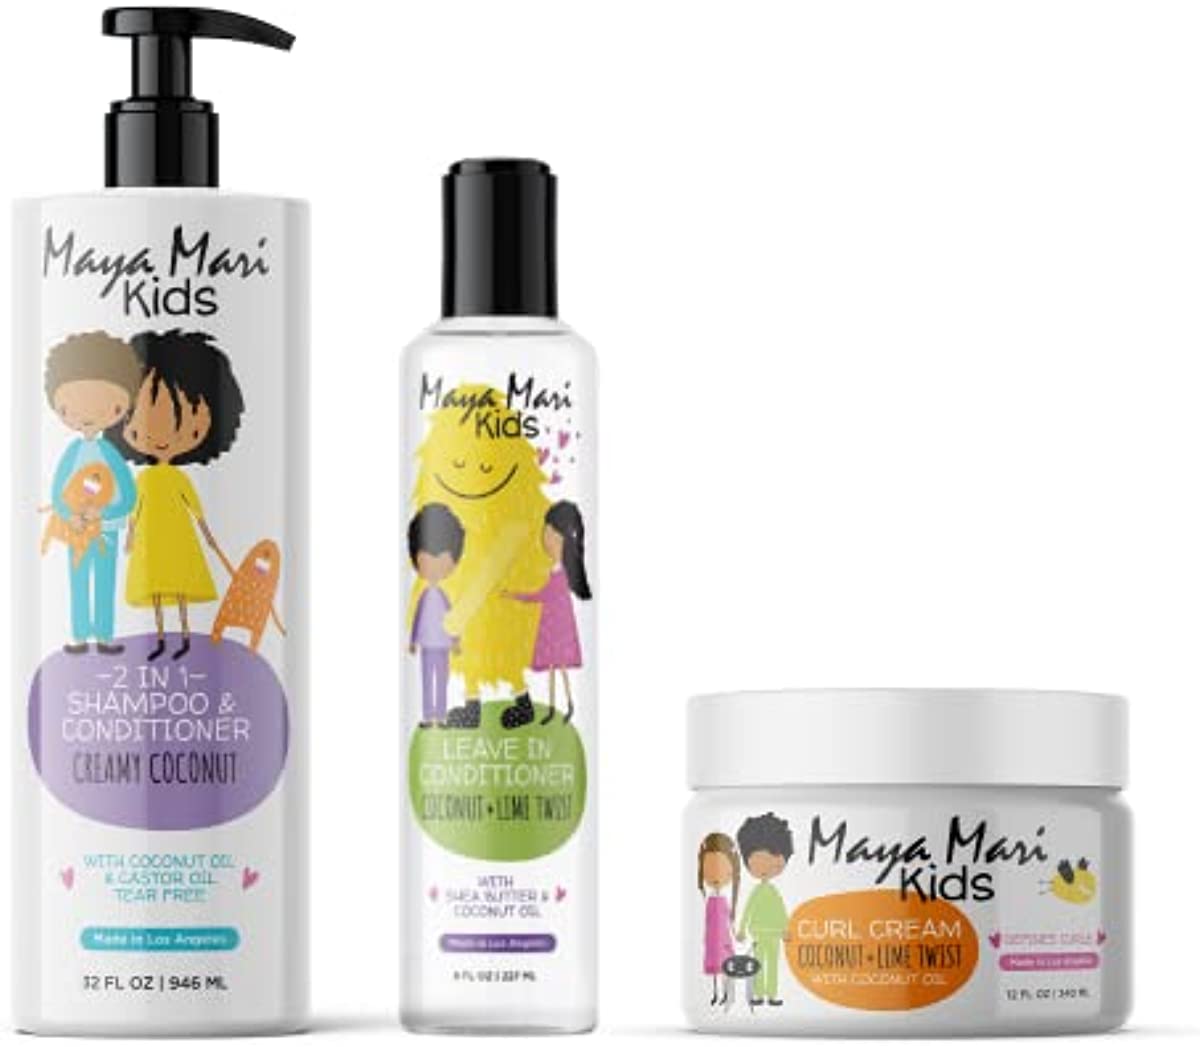 Maya Mari Curly Hair Kids Must Have Gift Set Including 2in1 Shampoo, Leave-In Conditioner and Curl Cream